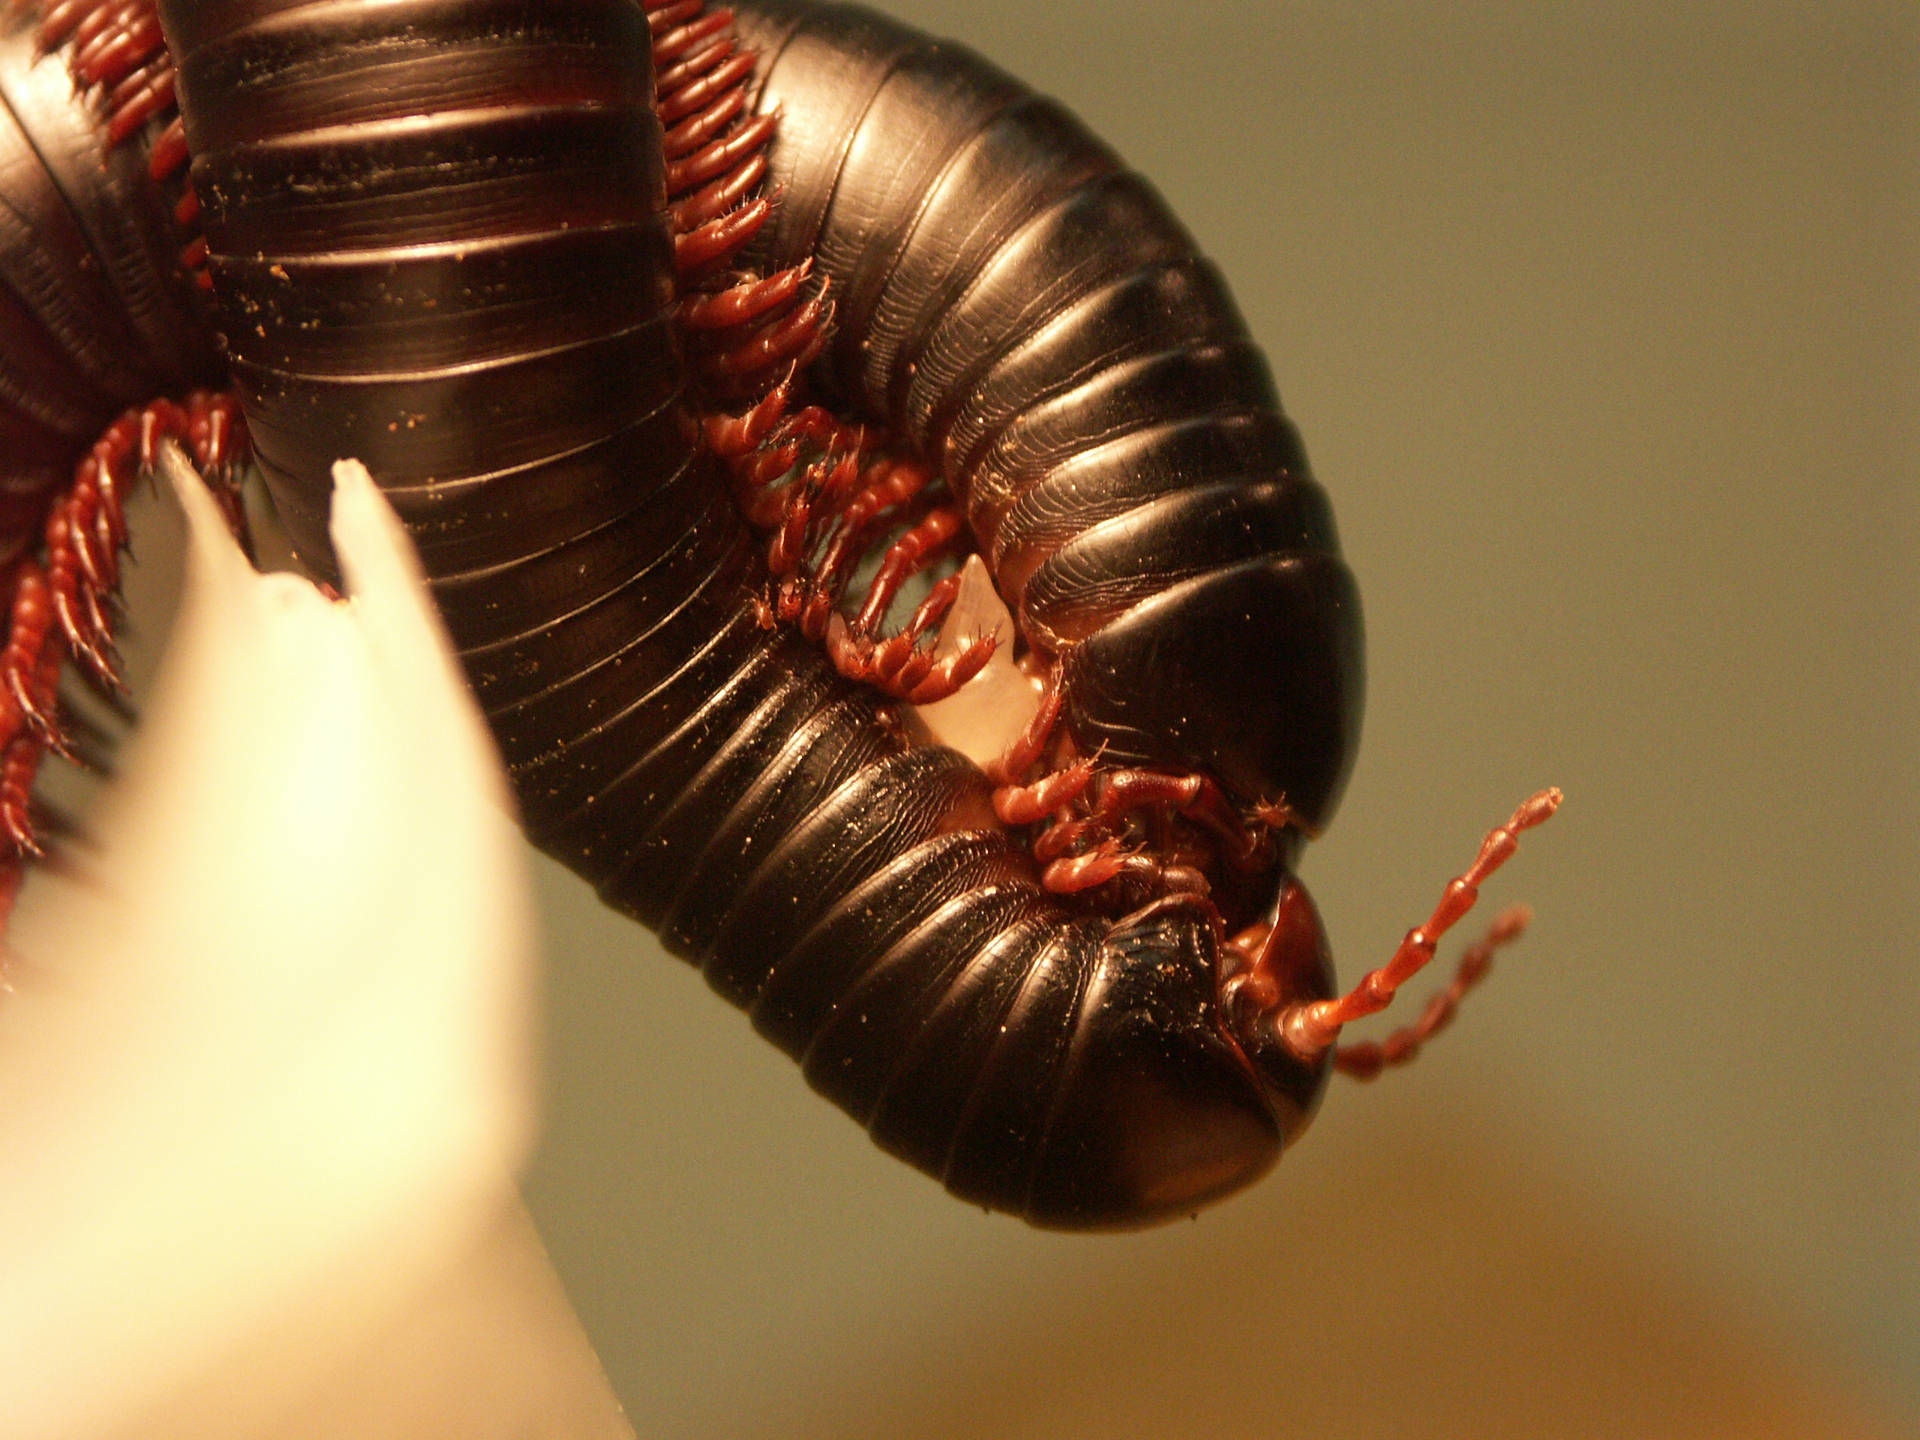 Giant African Millipede Entwining With Another Wallpaper